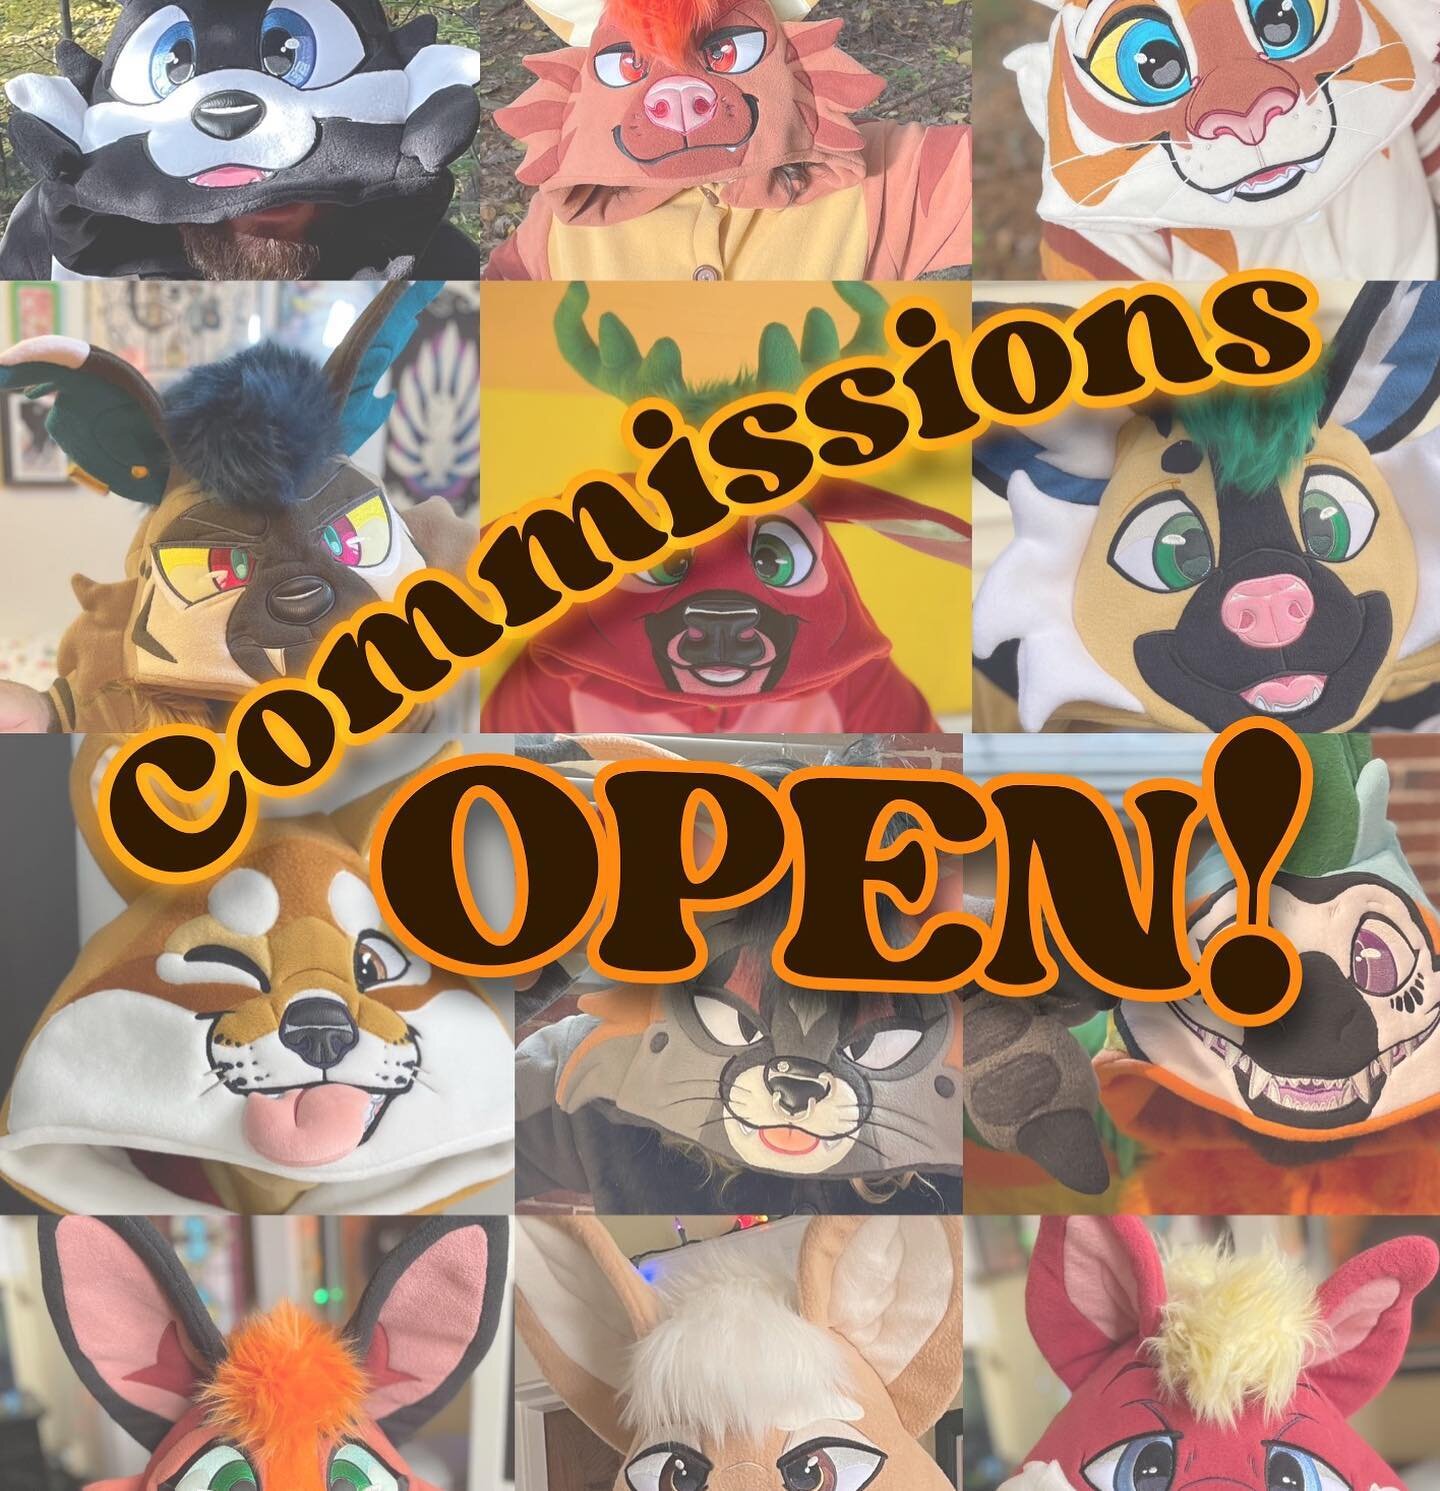 Commissions are now open at https://www.mangoislandcreations.com/commission

#mangoisland #kigurumi #commission #open #furry #fursona #fursuit #pajamas #custom #handmade